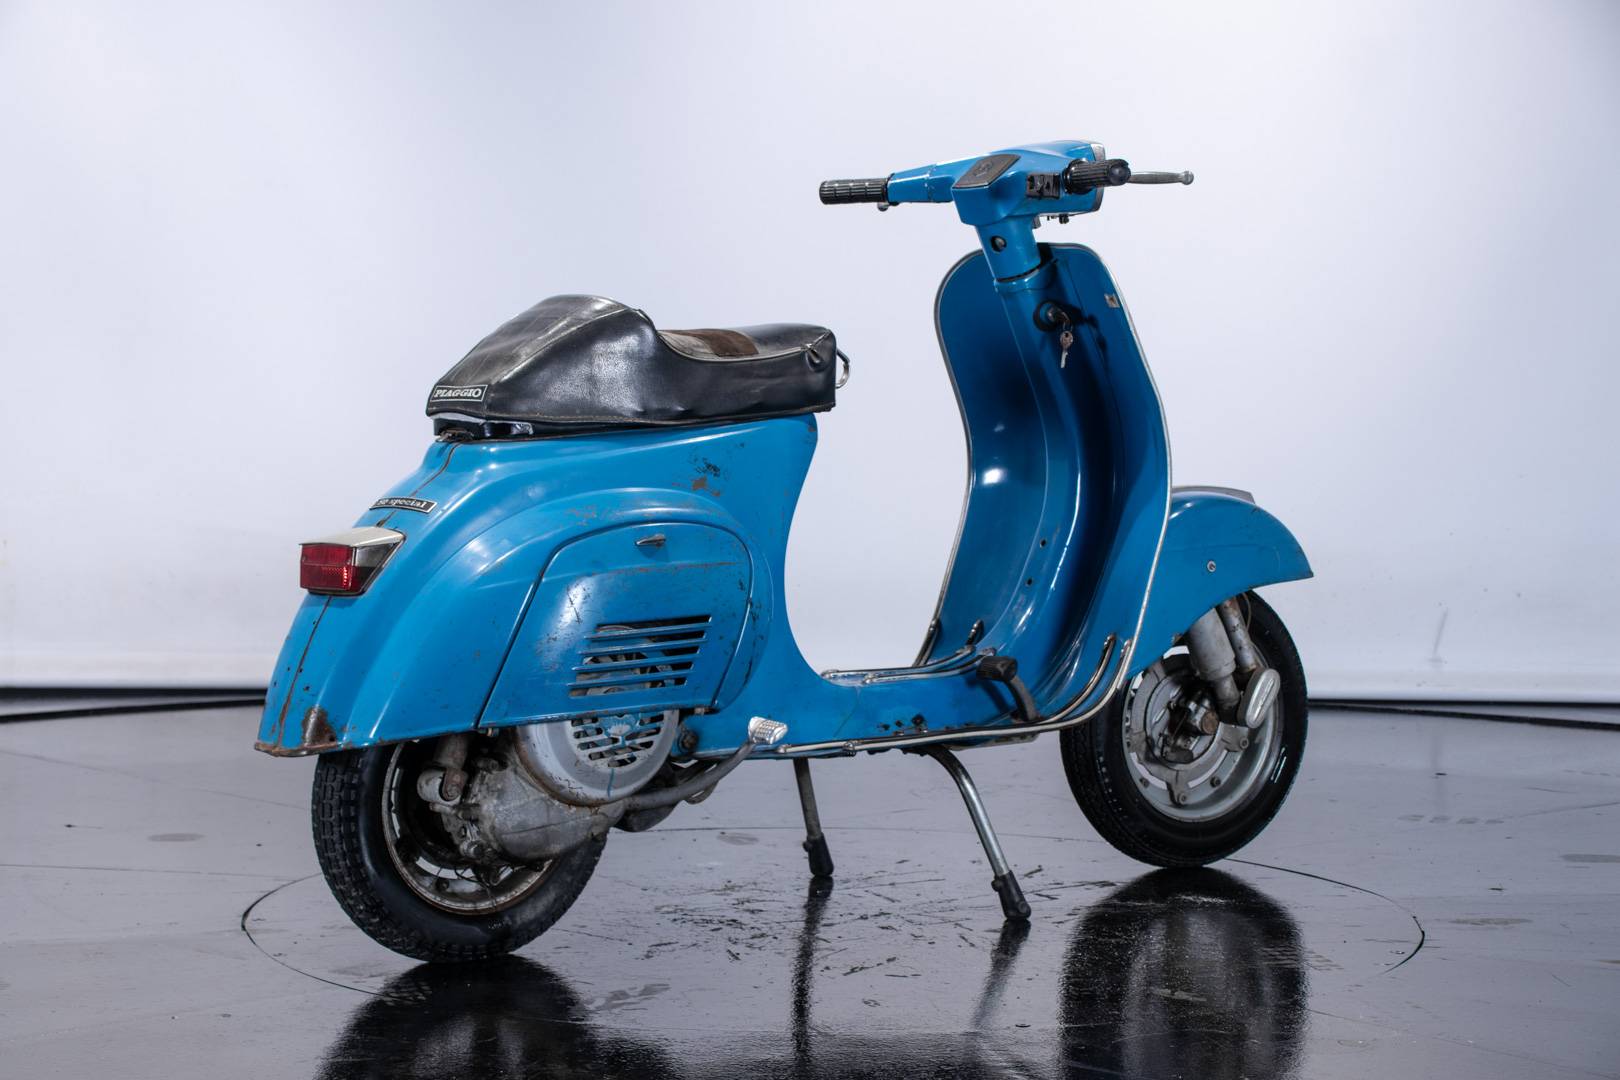 For Sale: Piaggio Vespa 50 Special (1979) offered for Price on request